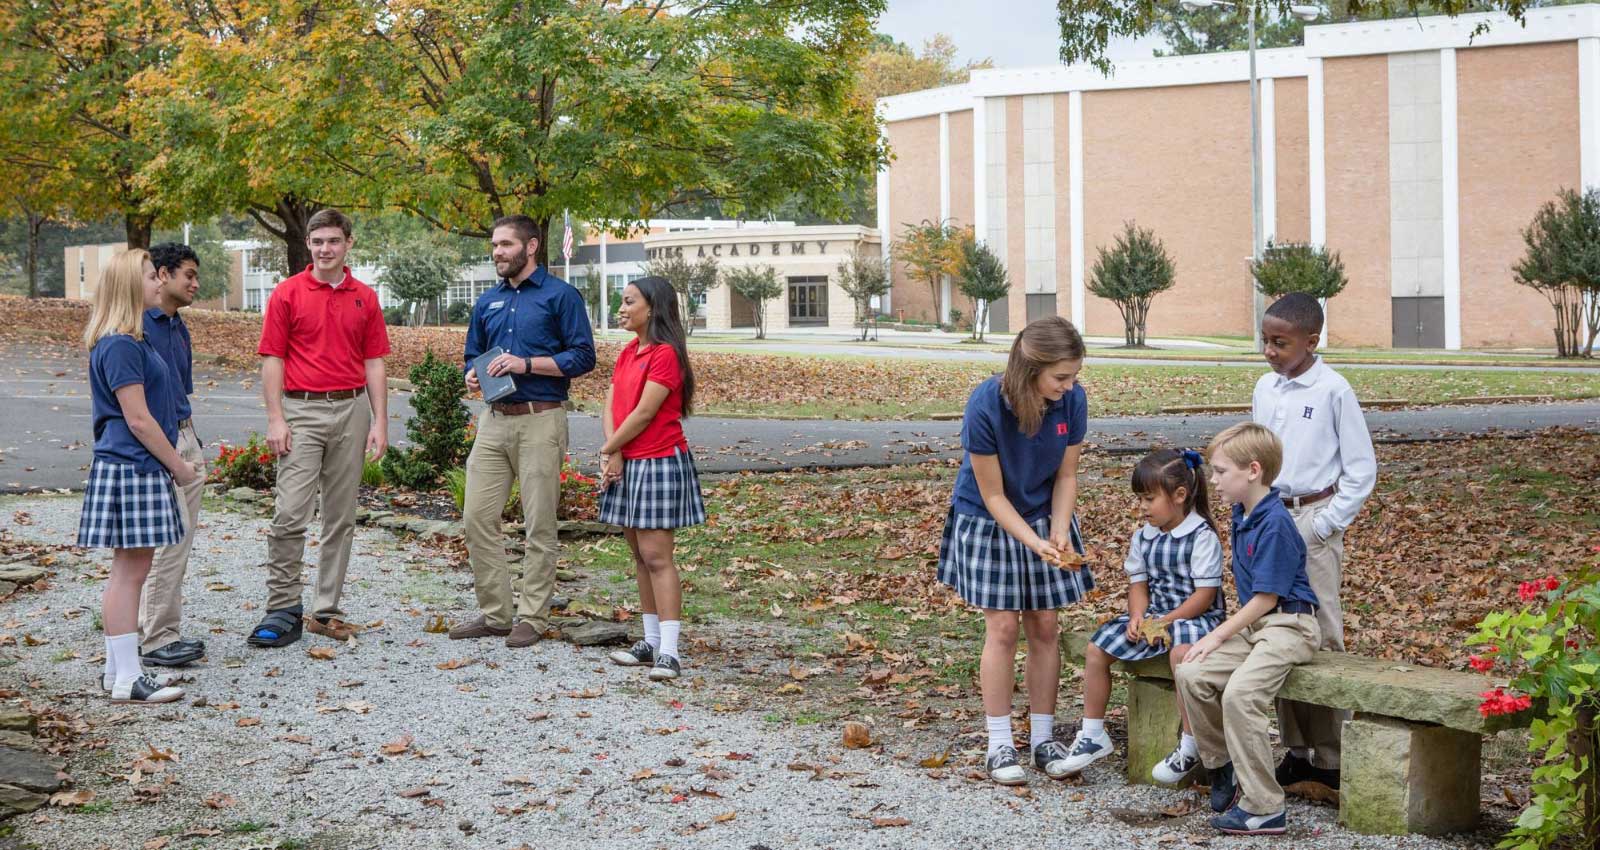 people standing outside of a school in uniforms